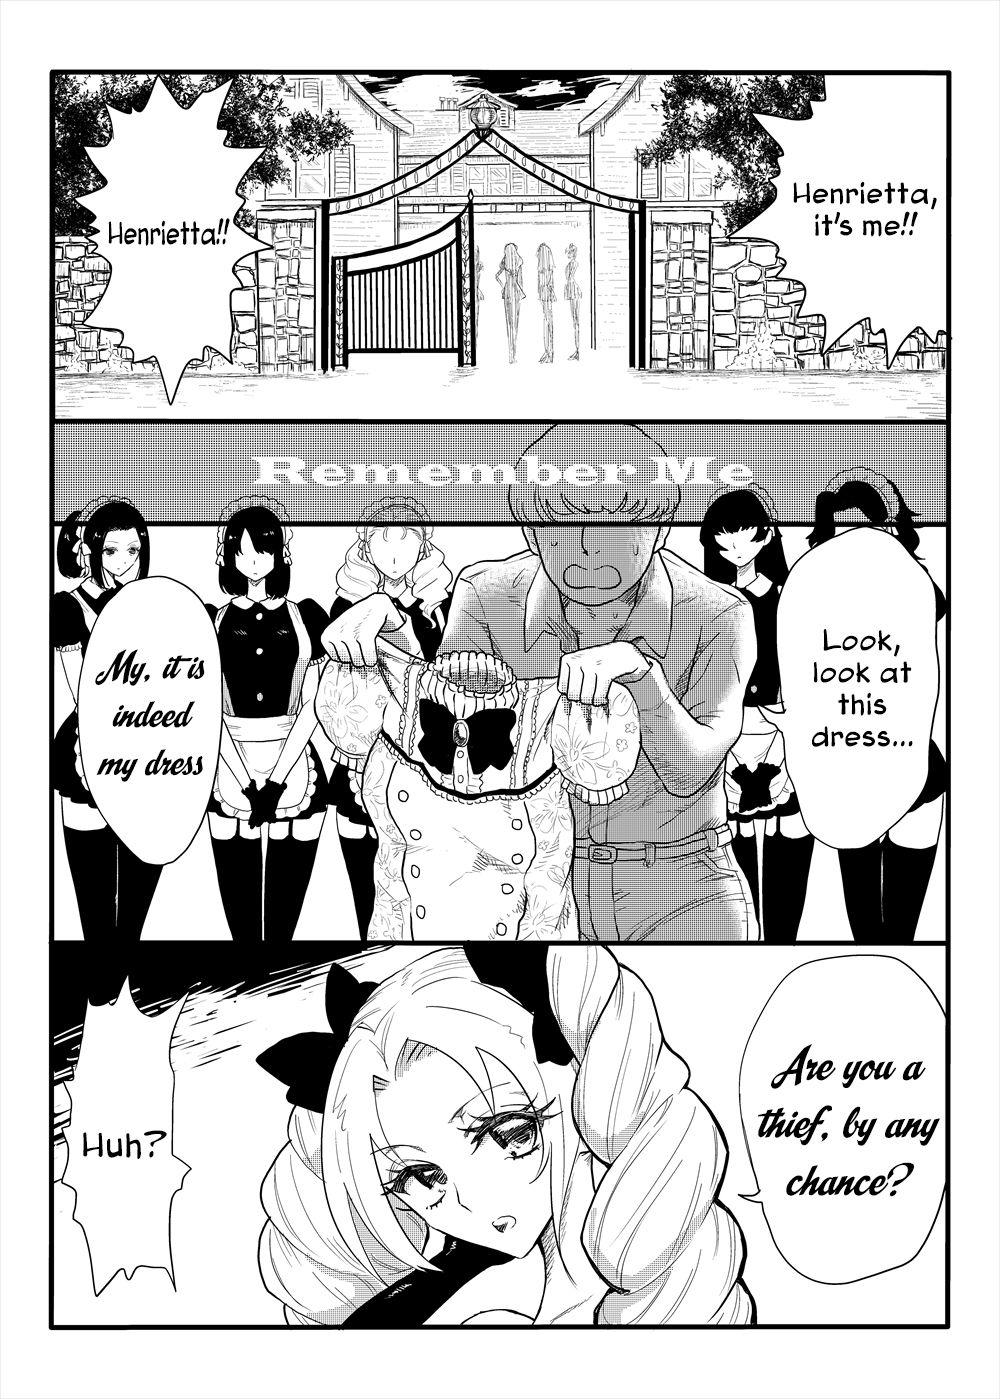 Level Drain Page 10 Of 17 original hentai haven, Level Drain Page 10 Of 17 ...